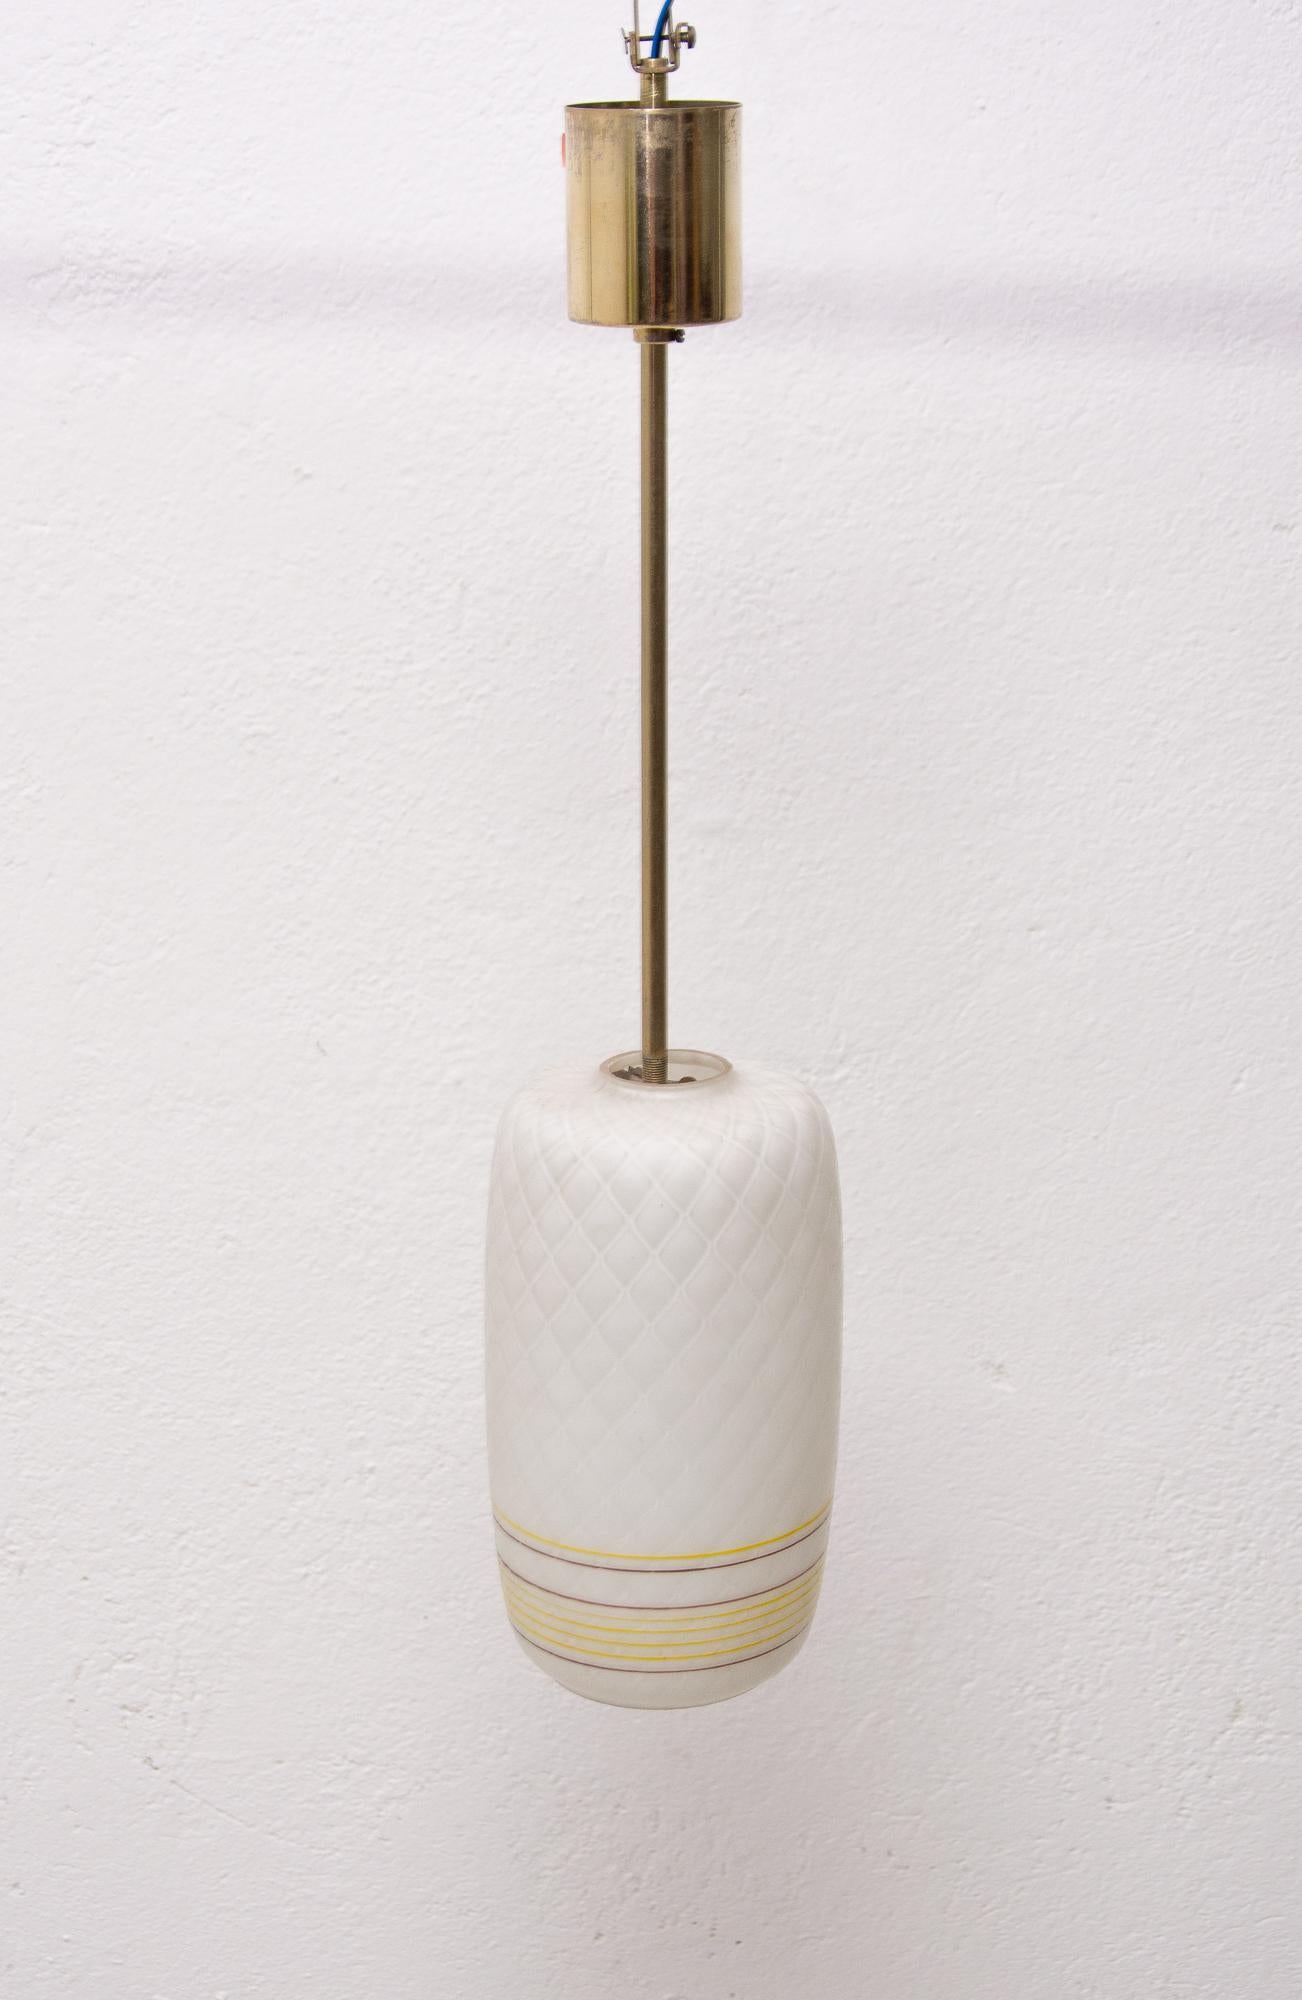 Midcentury Hanging Lamp-Pendant, 1960s, Czechoslovakia In Good Condition For Sale In Prague 8, CZ